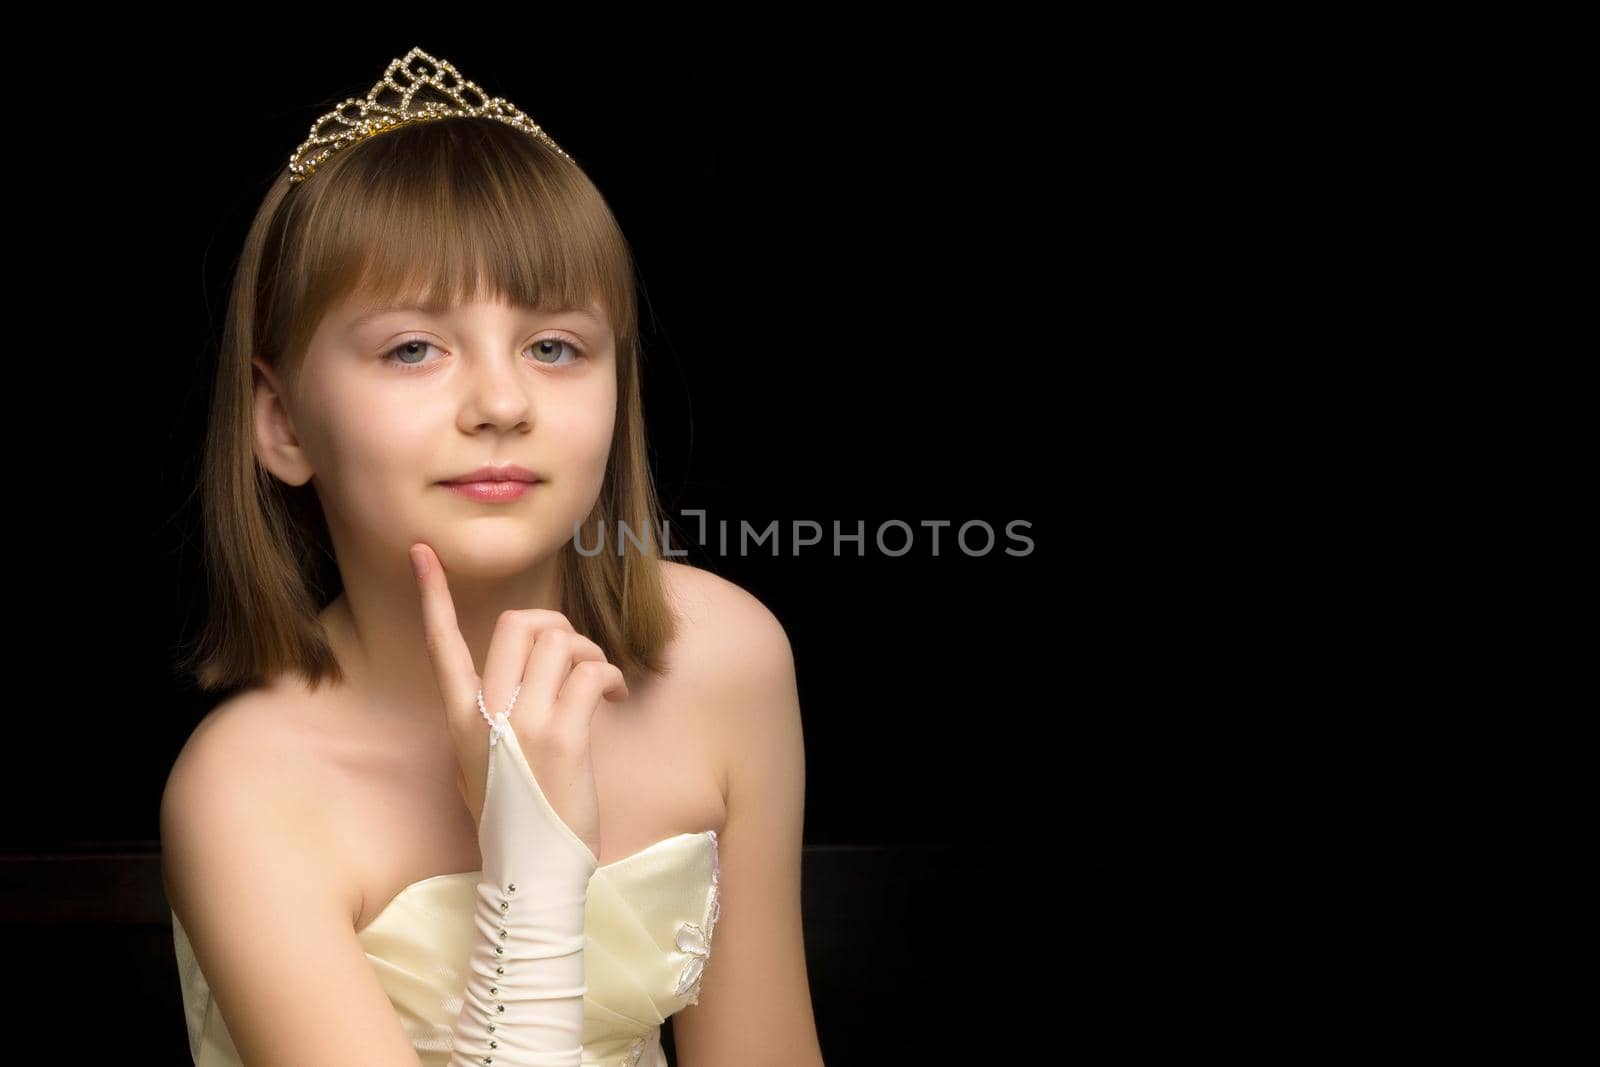 The little girl folded her hands around her face.Isolated on a black background. by kolesnikov_studio